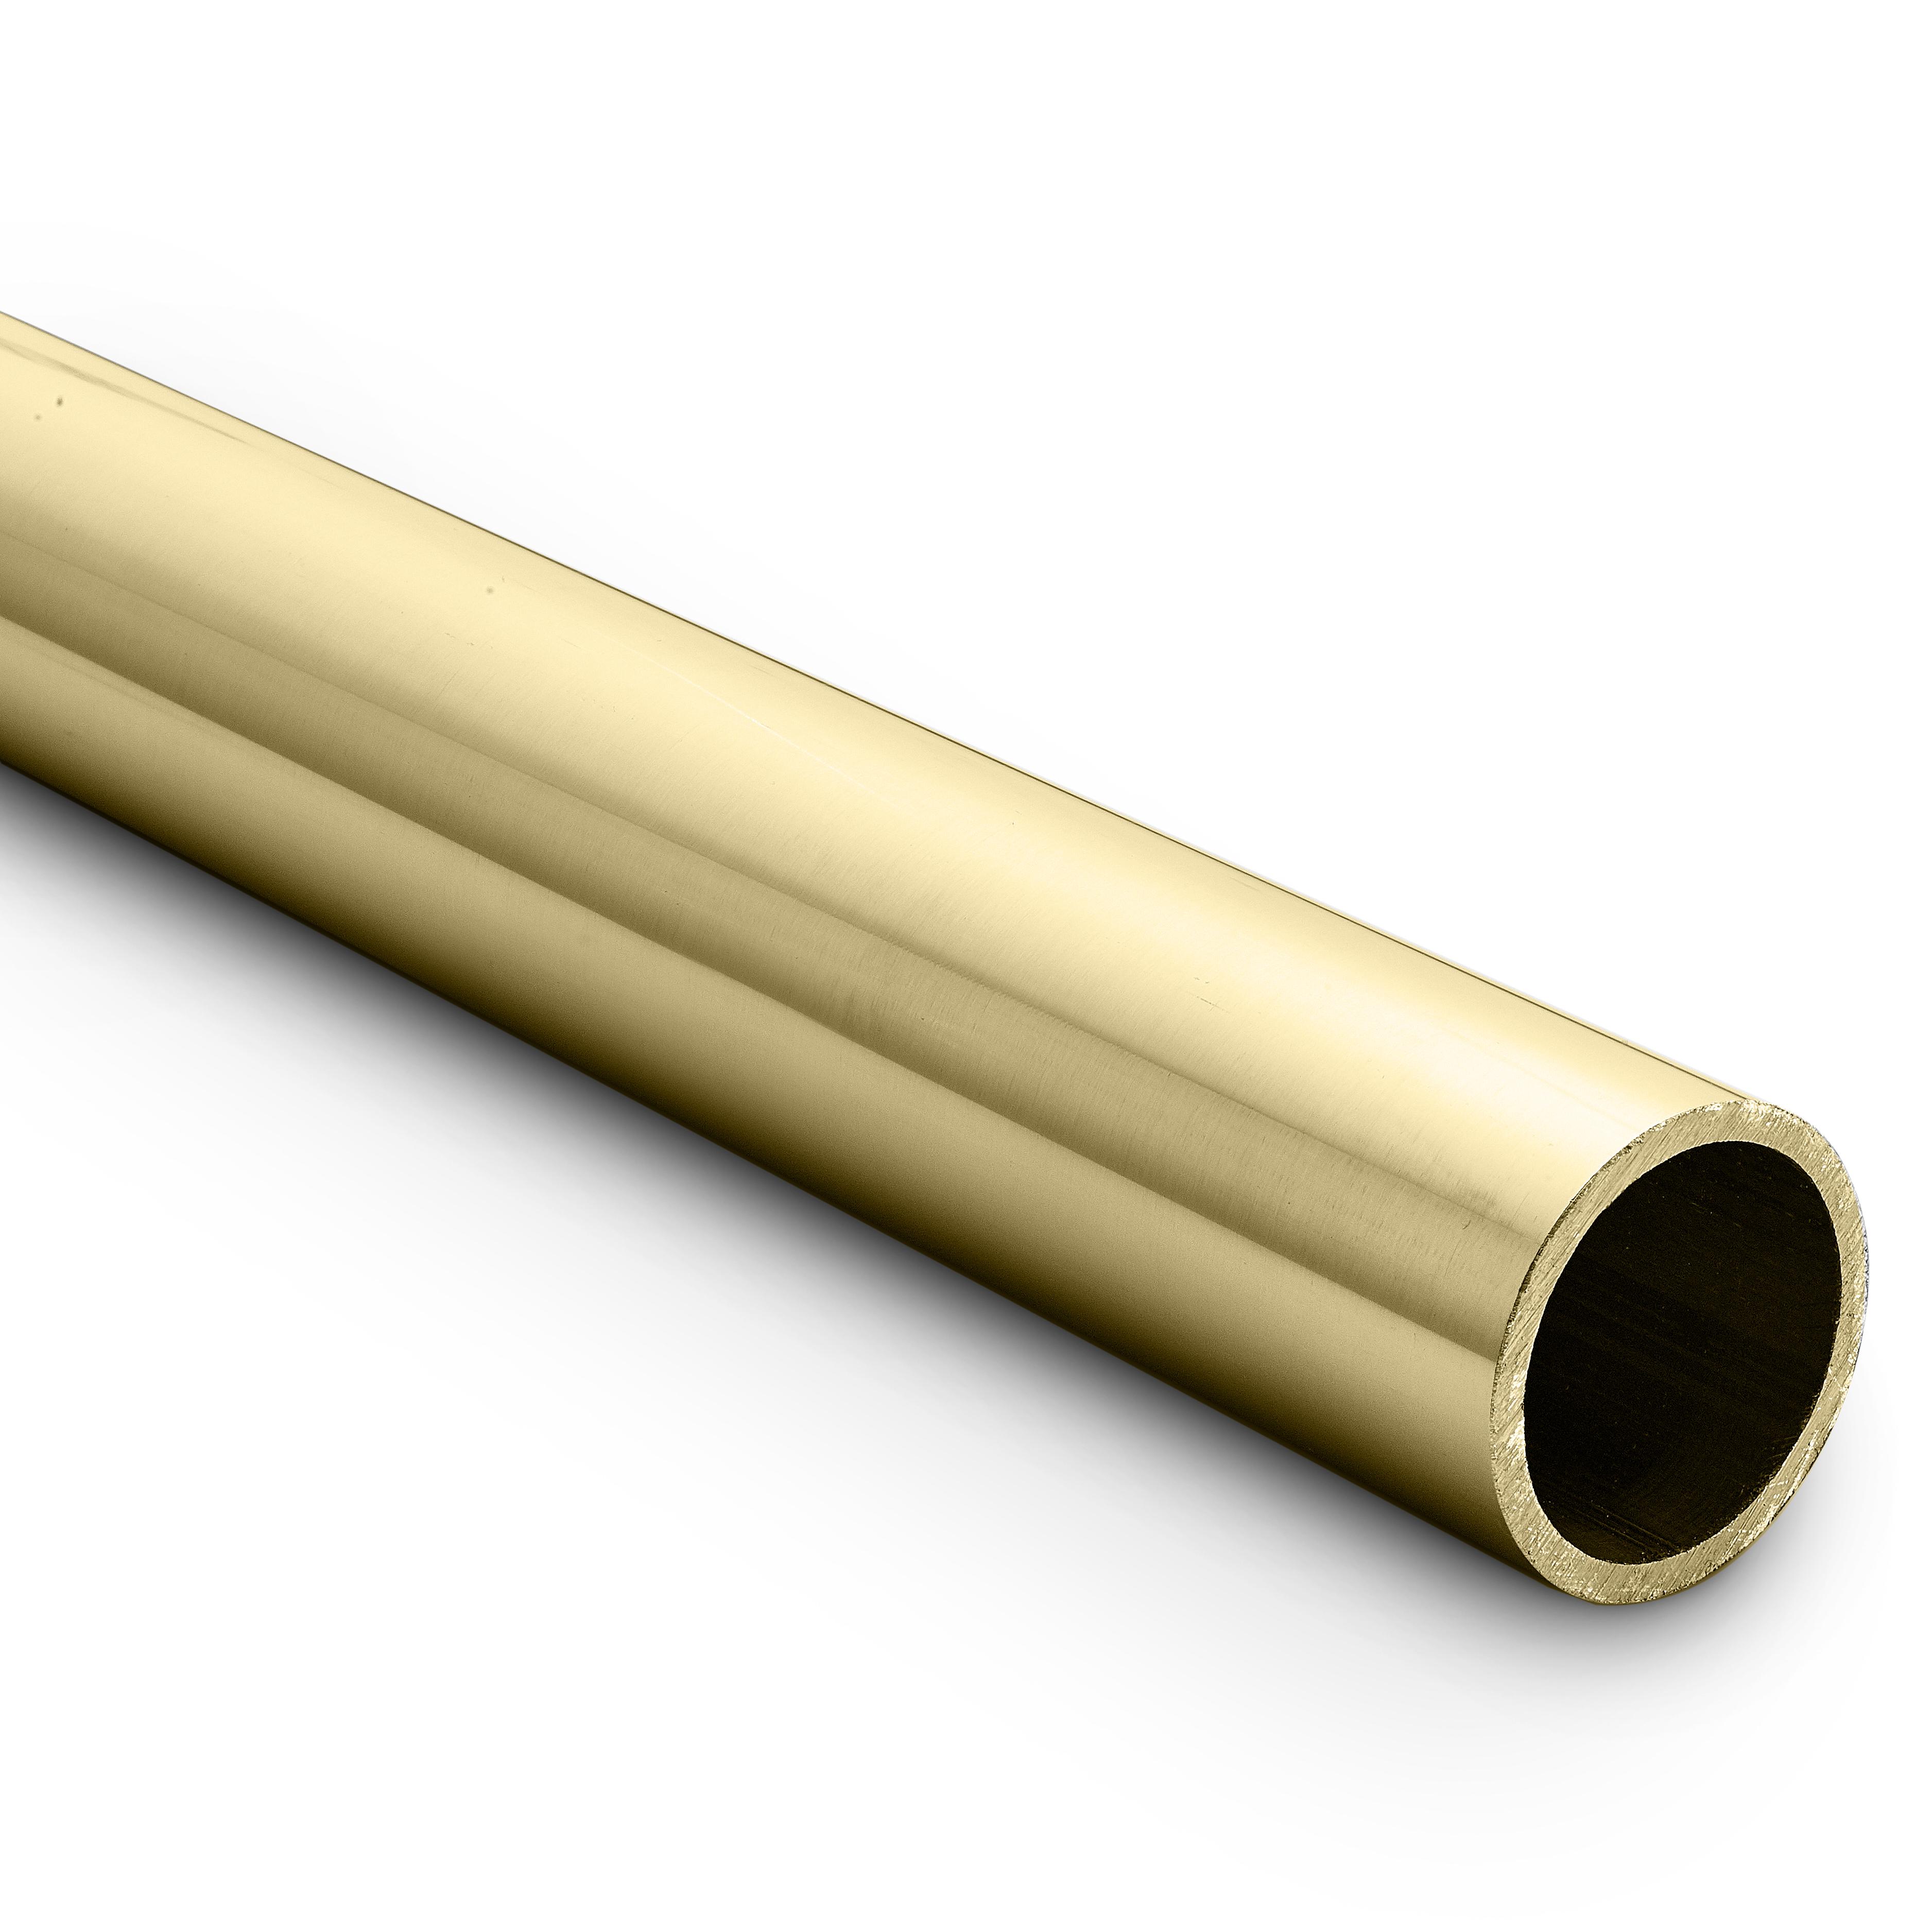 5 metre lengths Bright Polished Brass Tube